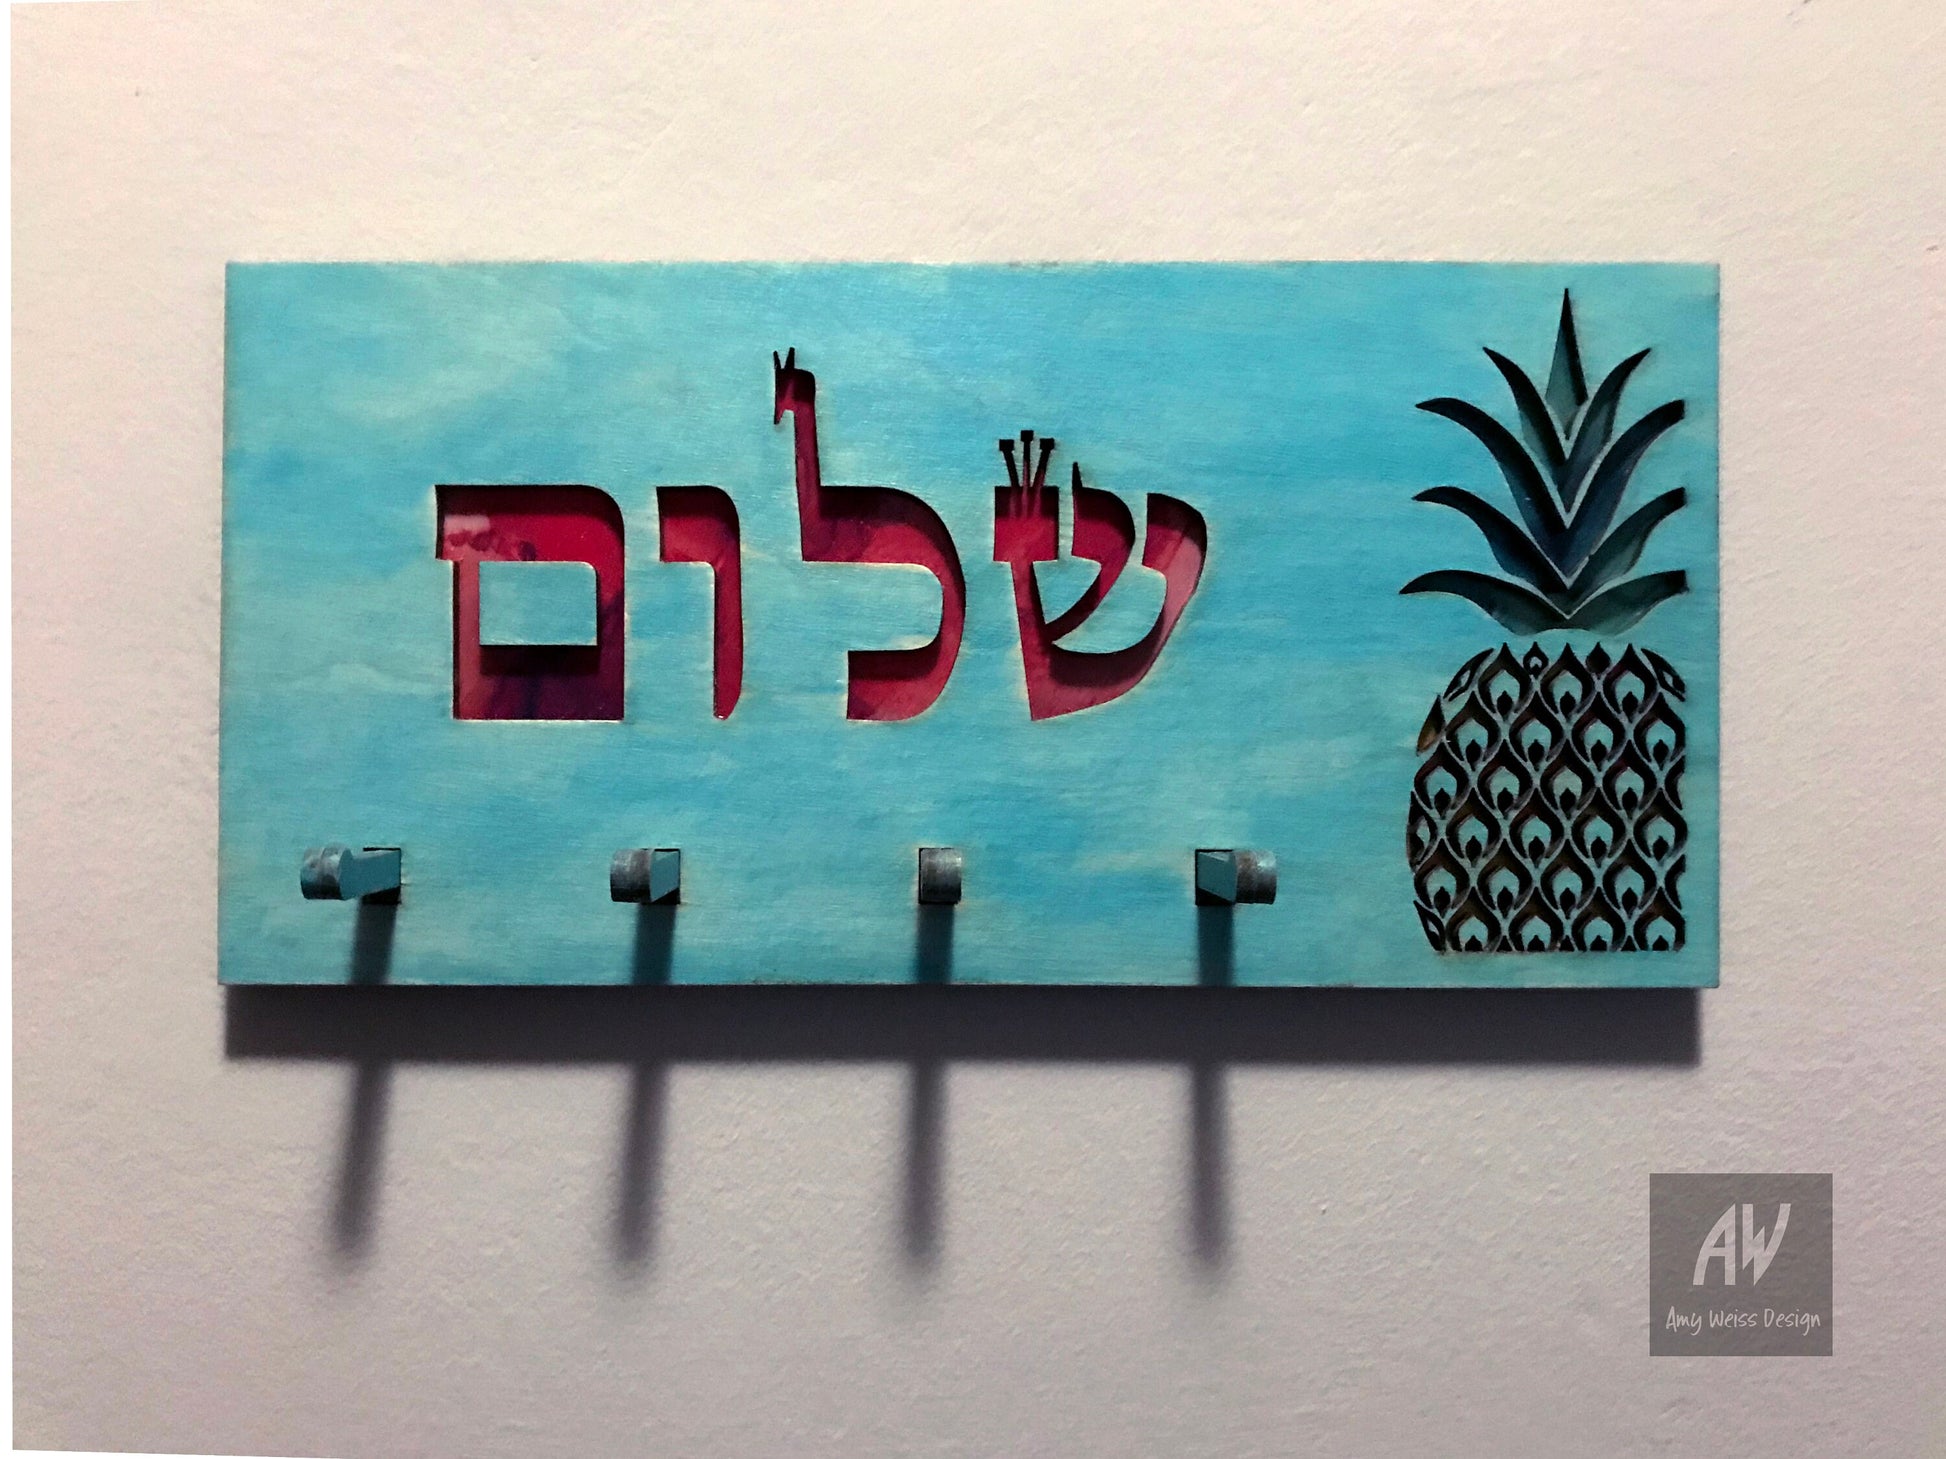 Blue Stained Wood key holder with the word Hebrew word "שלום" (shalom) and pineapple cutout. Red, yellow, and green showing through the holes. 4 pegs to hold keys.